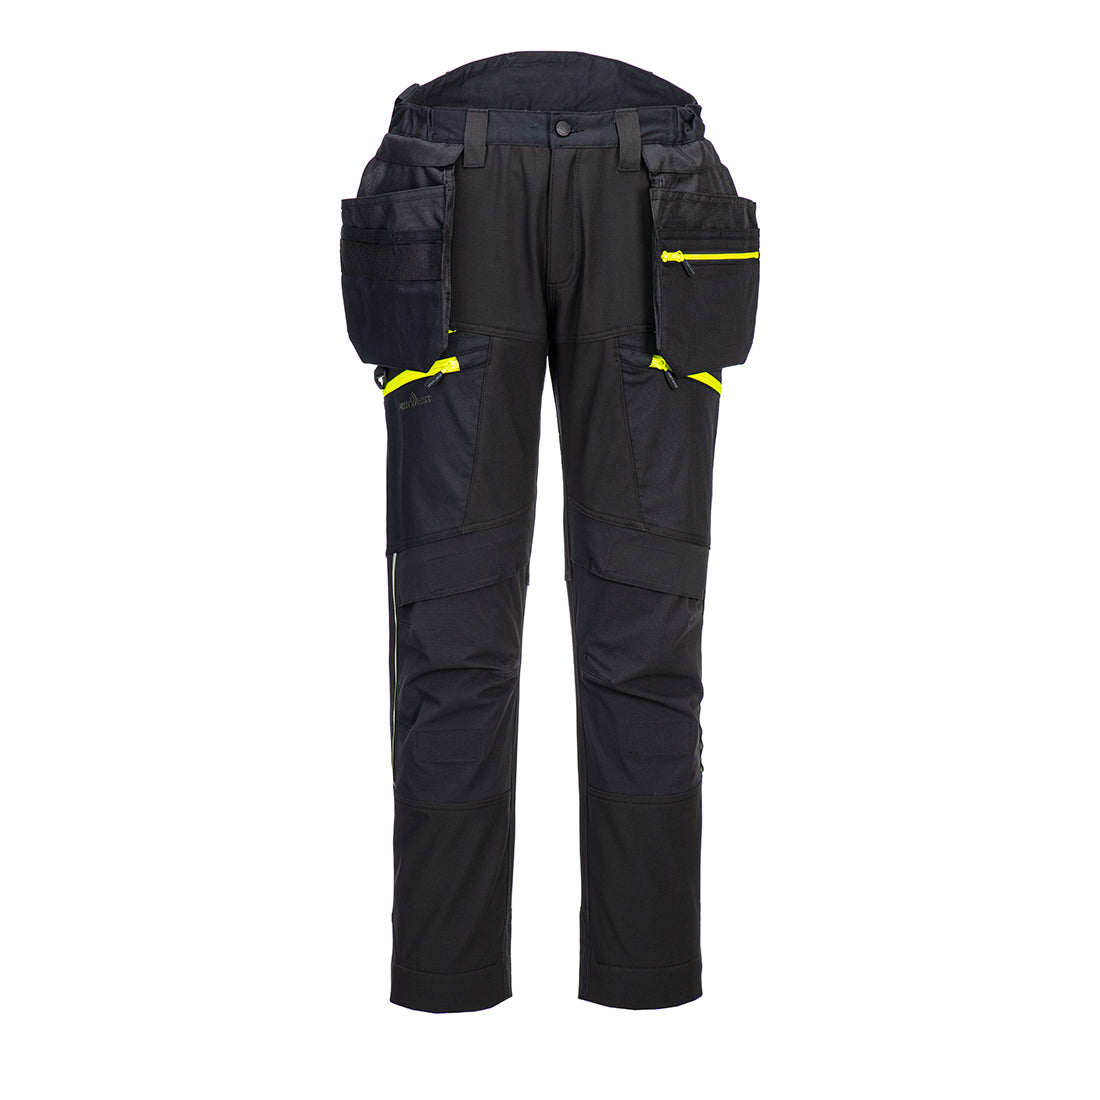 DX4 Detachable Holster Pocket Softshell Trousers  (DX450)